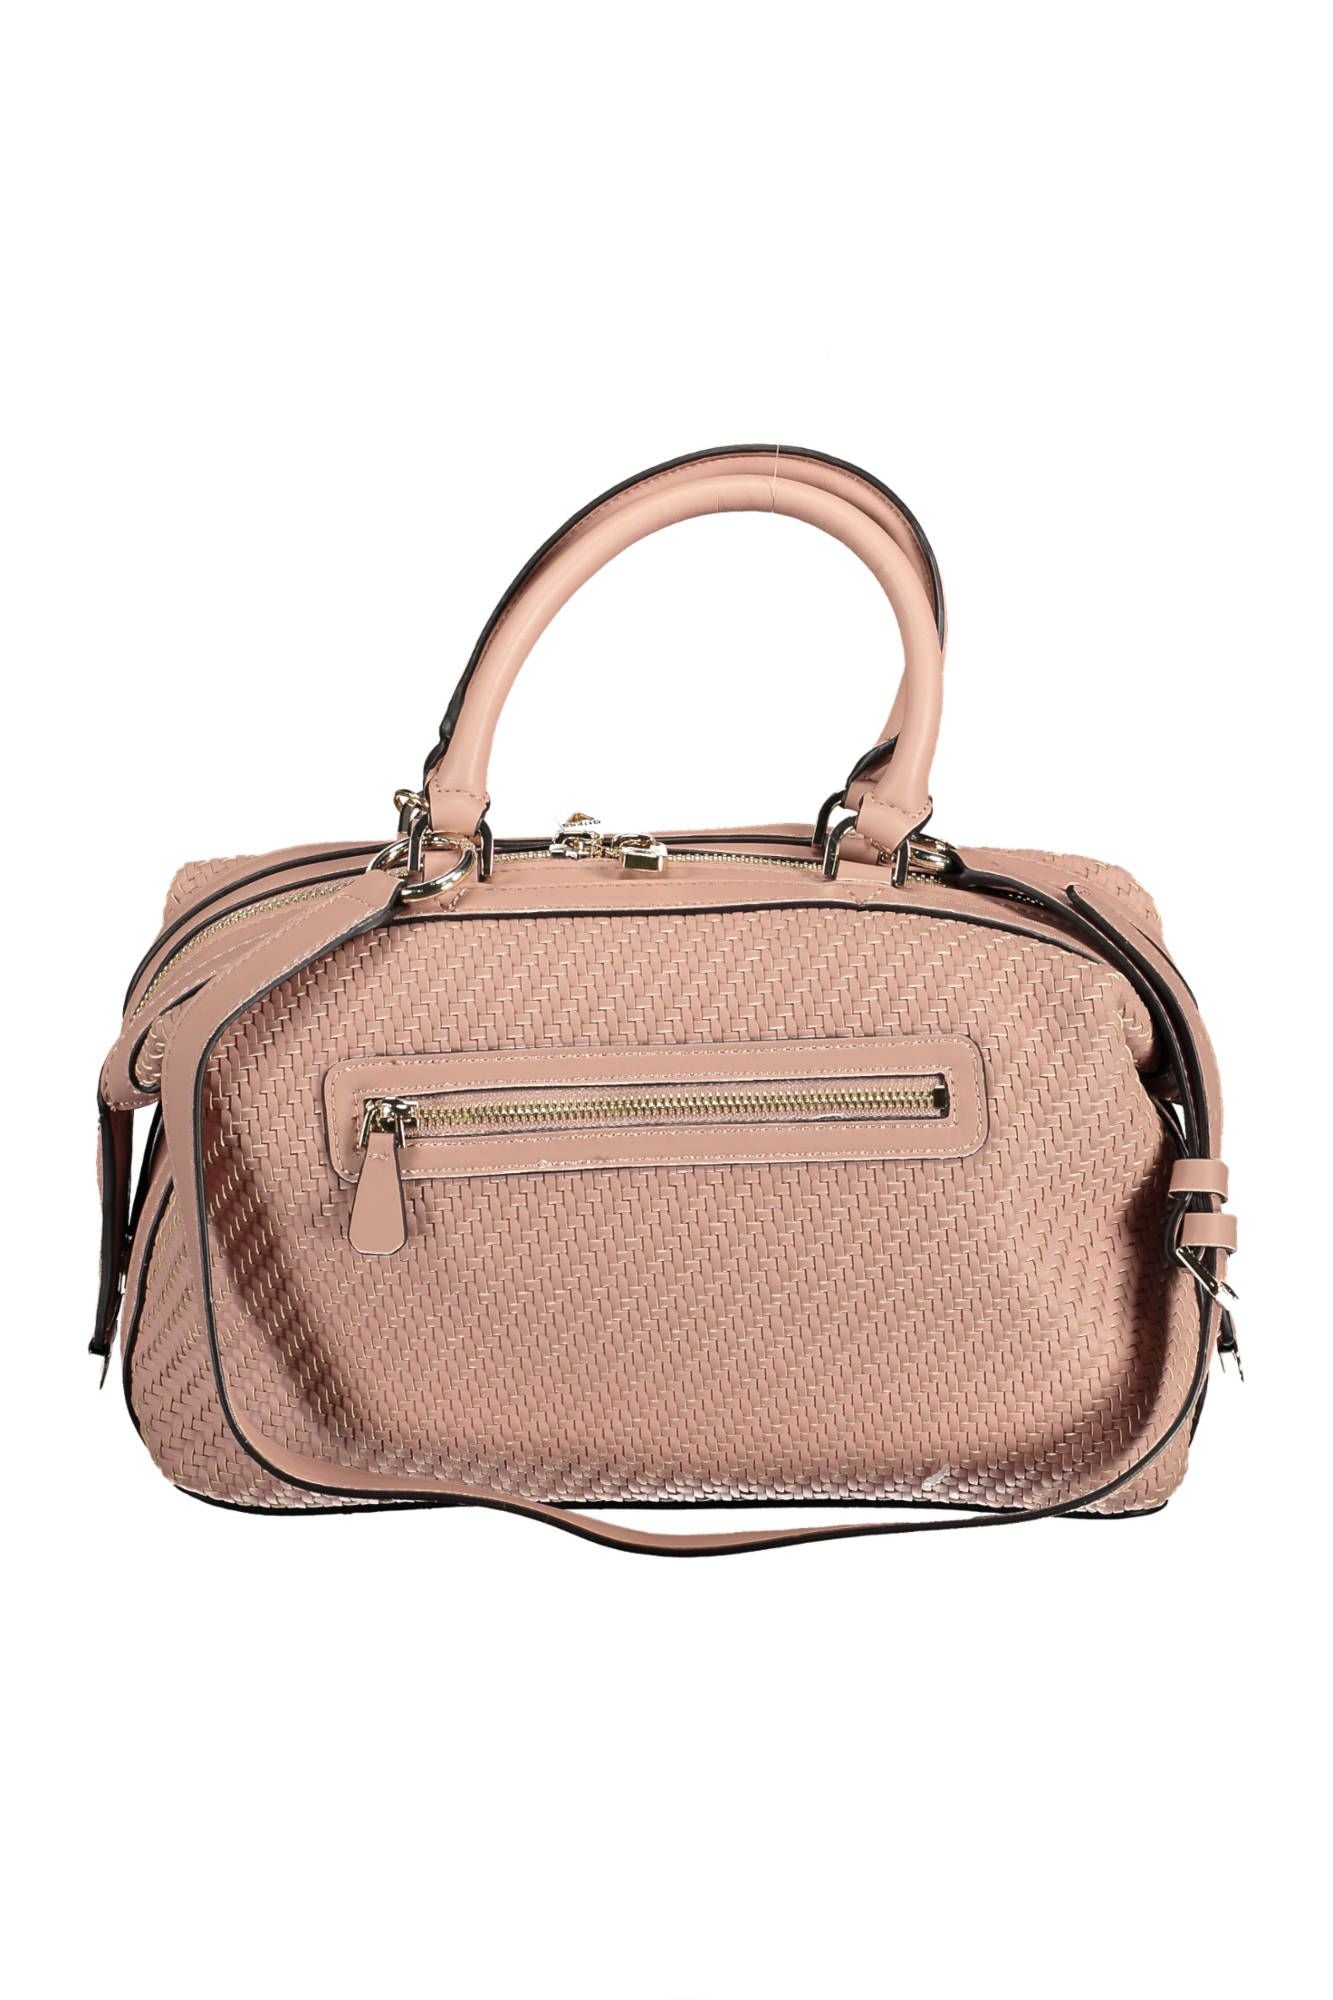 Guess Jeans Chic Pink Satchel with Contrasting Details